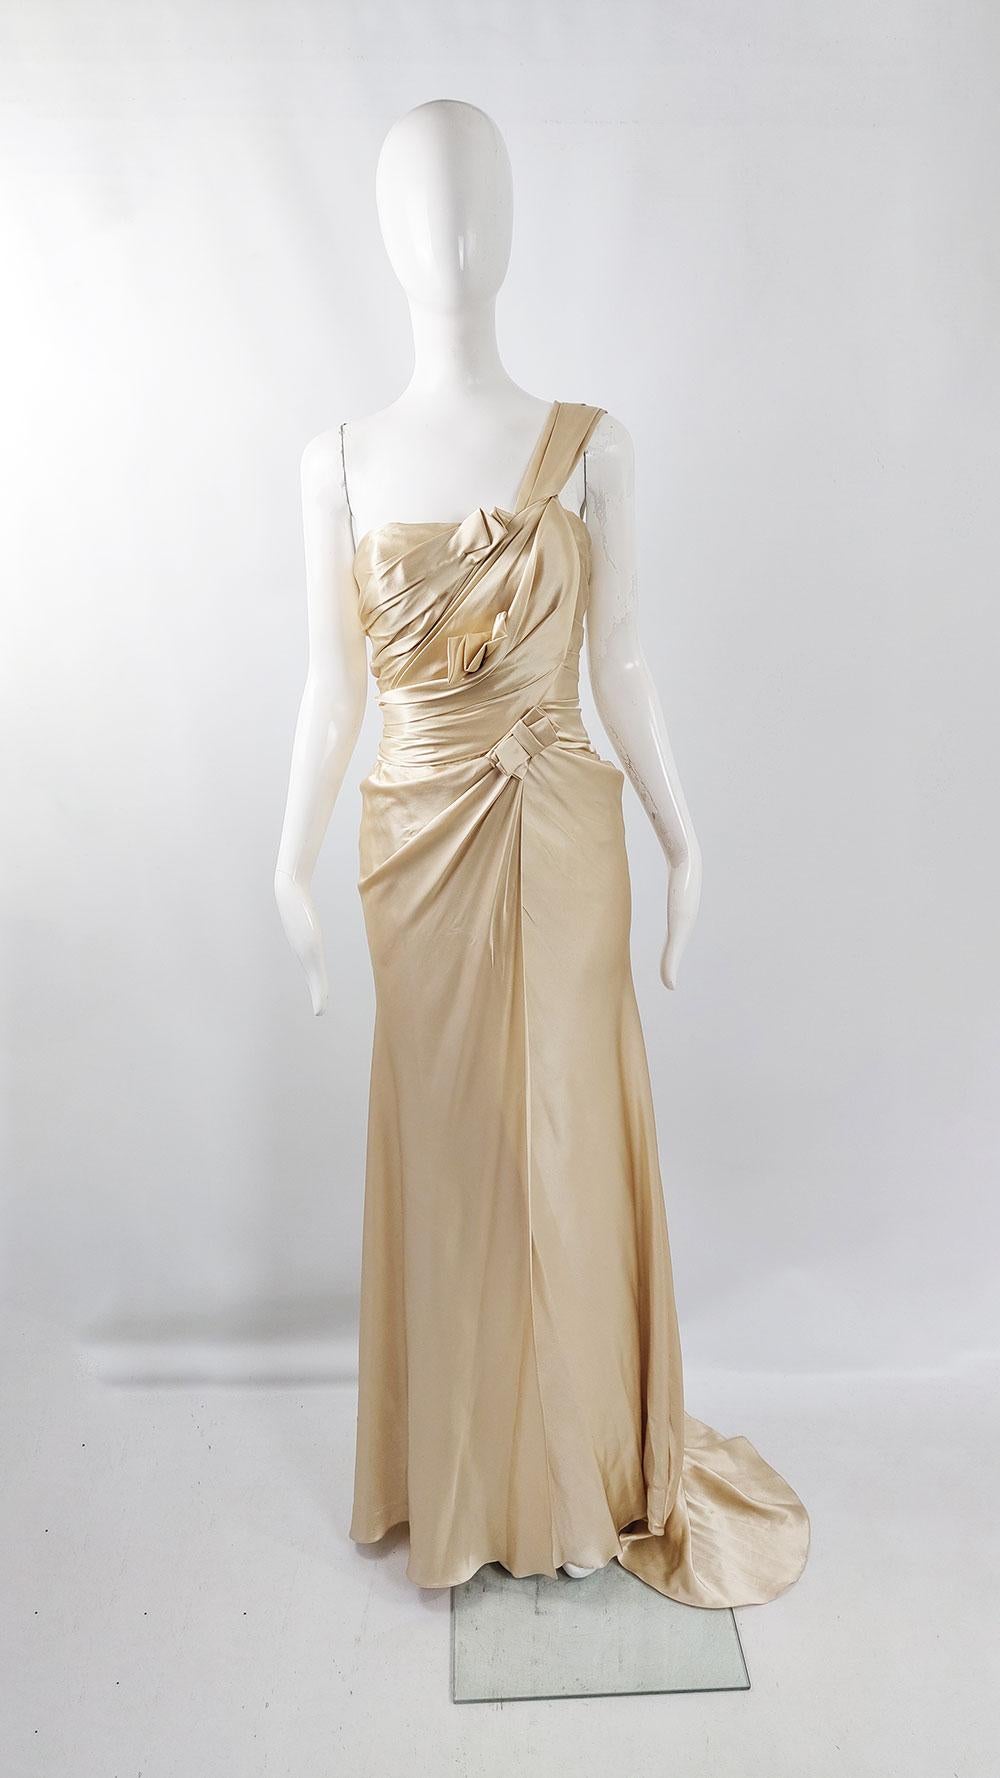 An exquisite vintage women's one-shoulder formal evening / wedding gown from luxury British designer David Fielden's bridal line 'Sposa'. The gown is crafted from pale gold silk charmeuse satin and features stunning Grecian goddess-style pleating at